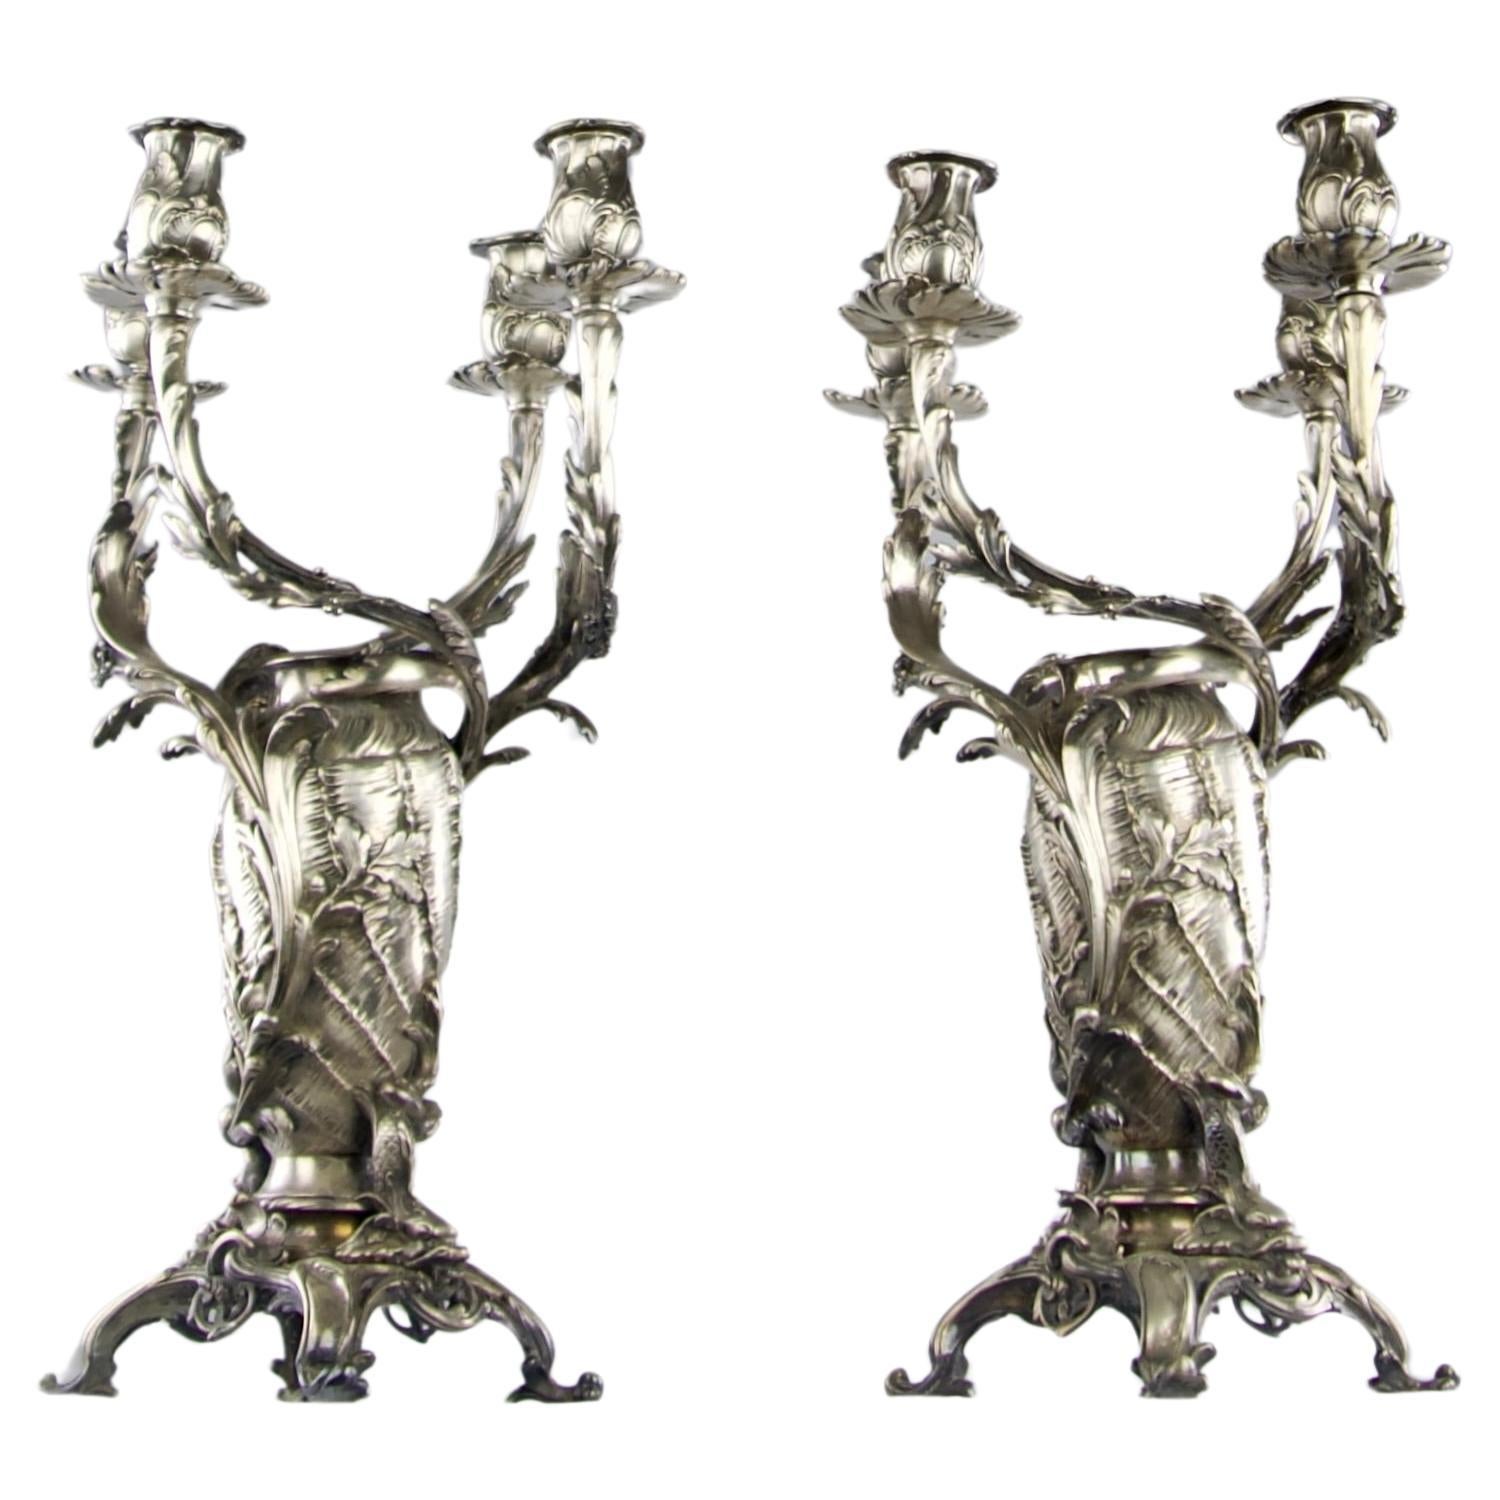 Christofle, Pair of Rocaille Candelabras, France 19th Century